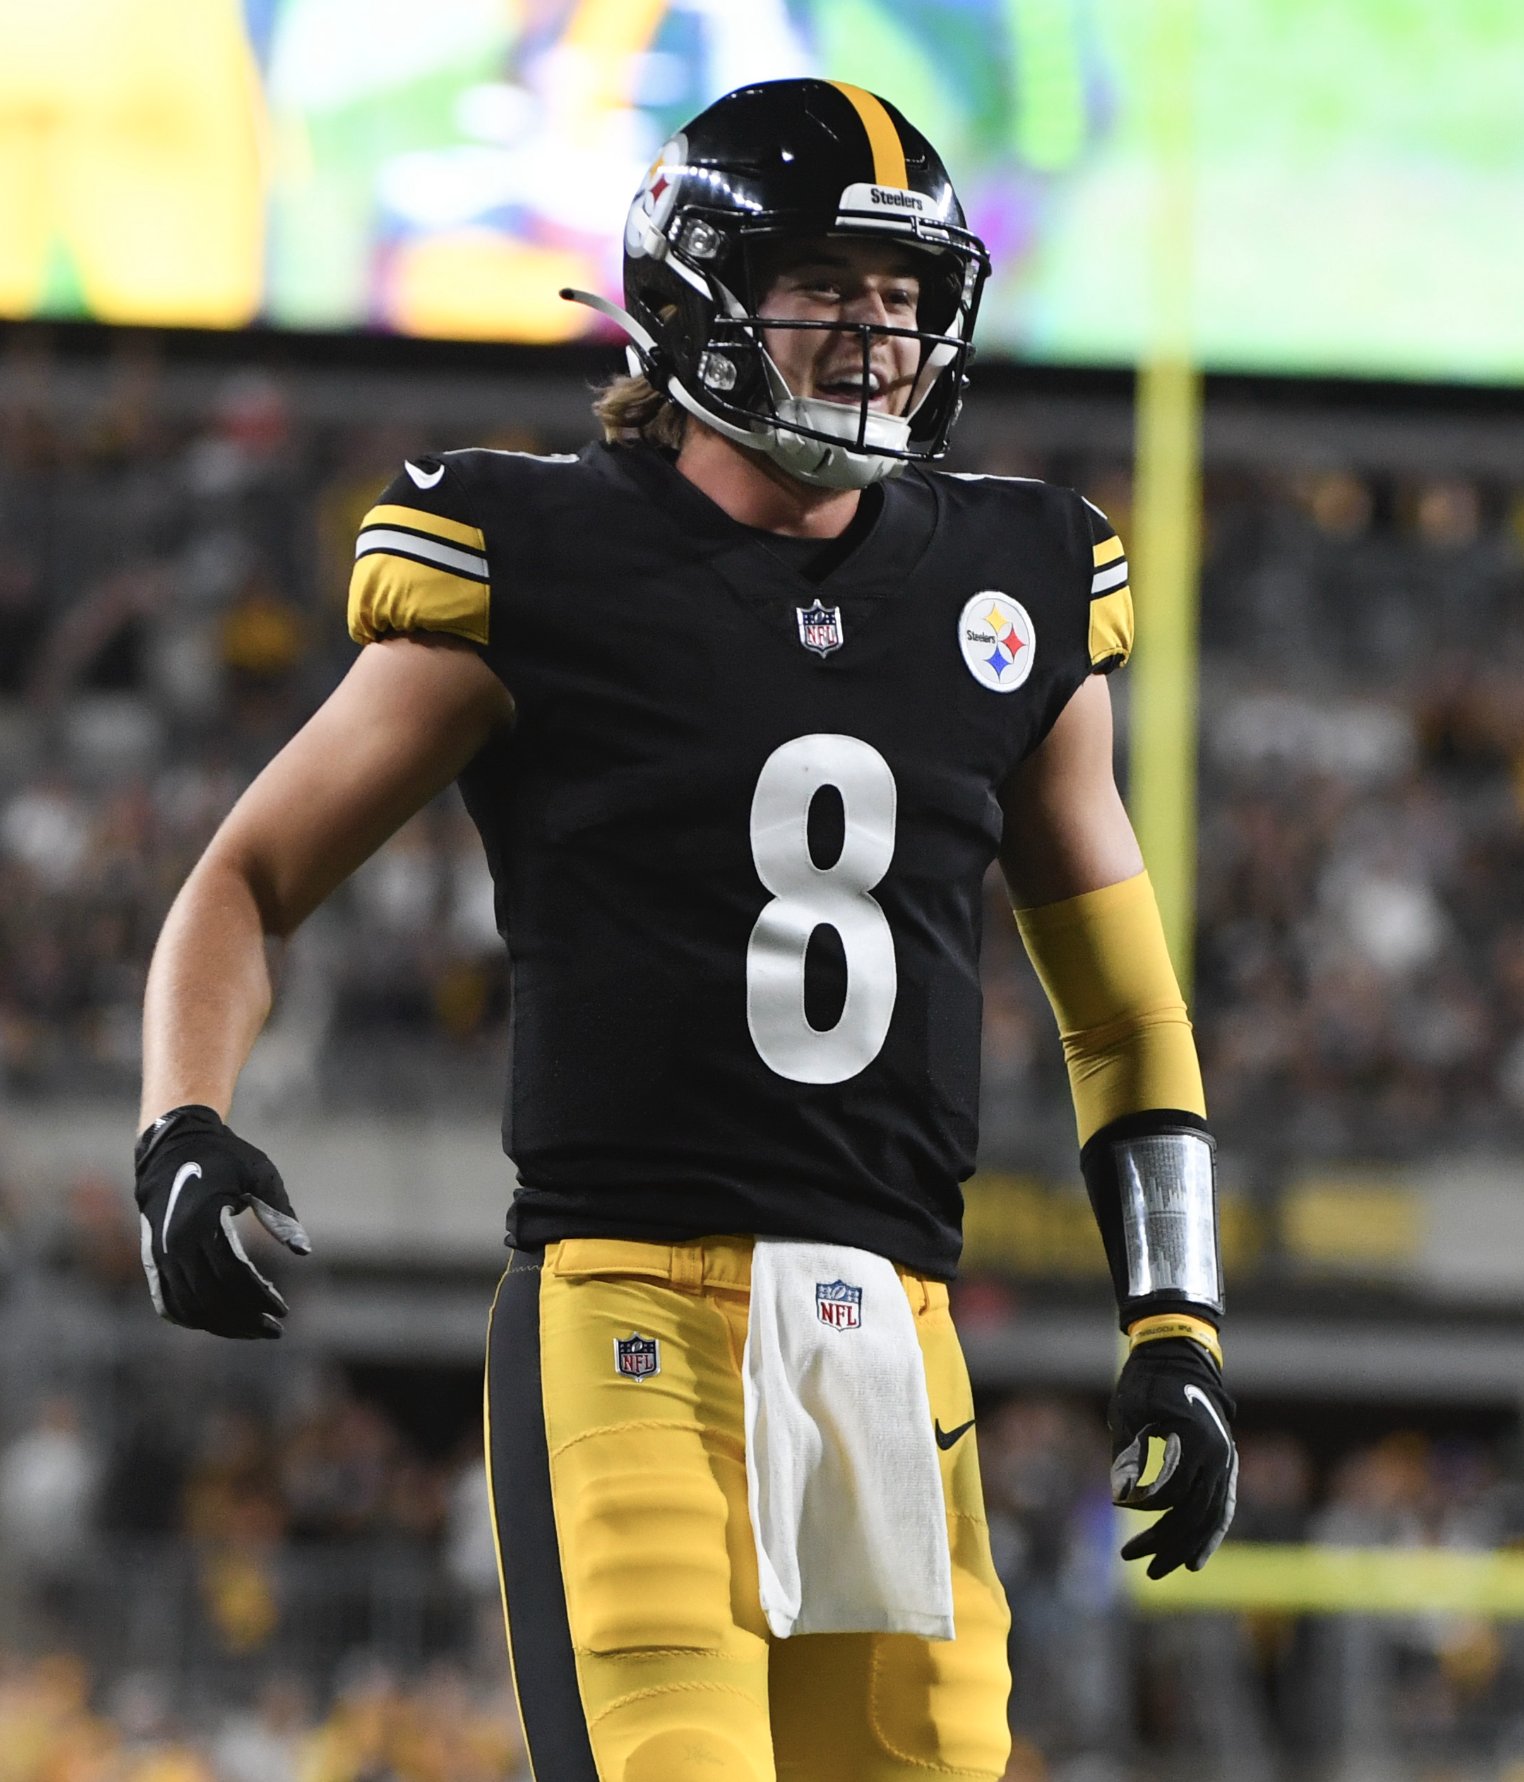 Pittsburgh Steelers on X: Get ready for Easy Picks, the ultimate pick 'em  game with weekly prizes by @BudLight and the @NFL. Make picks, earn points,  and you could score team gear